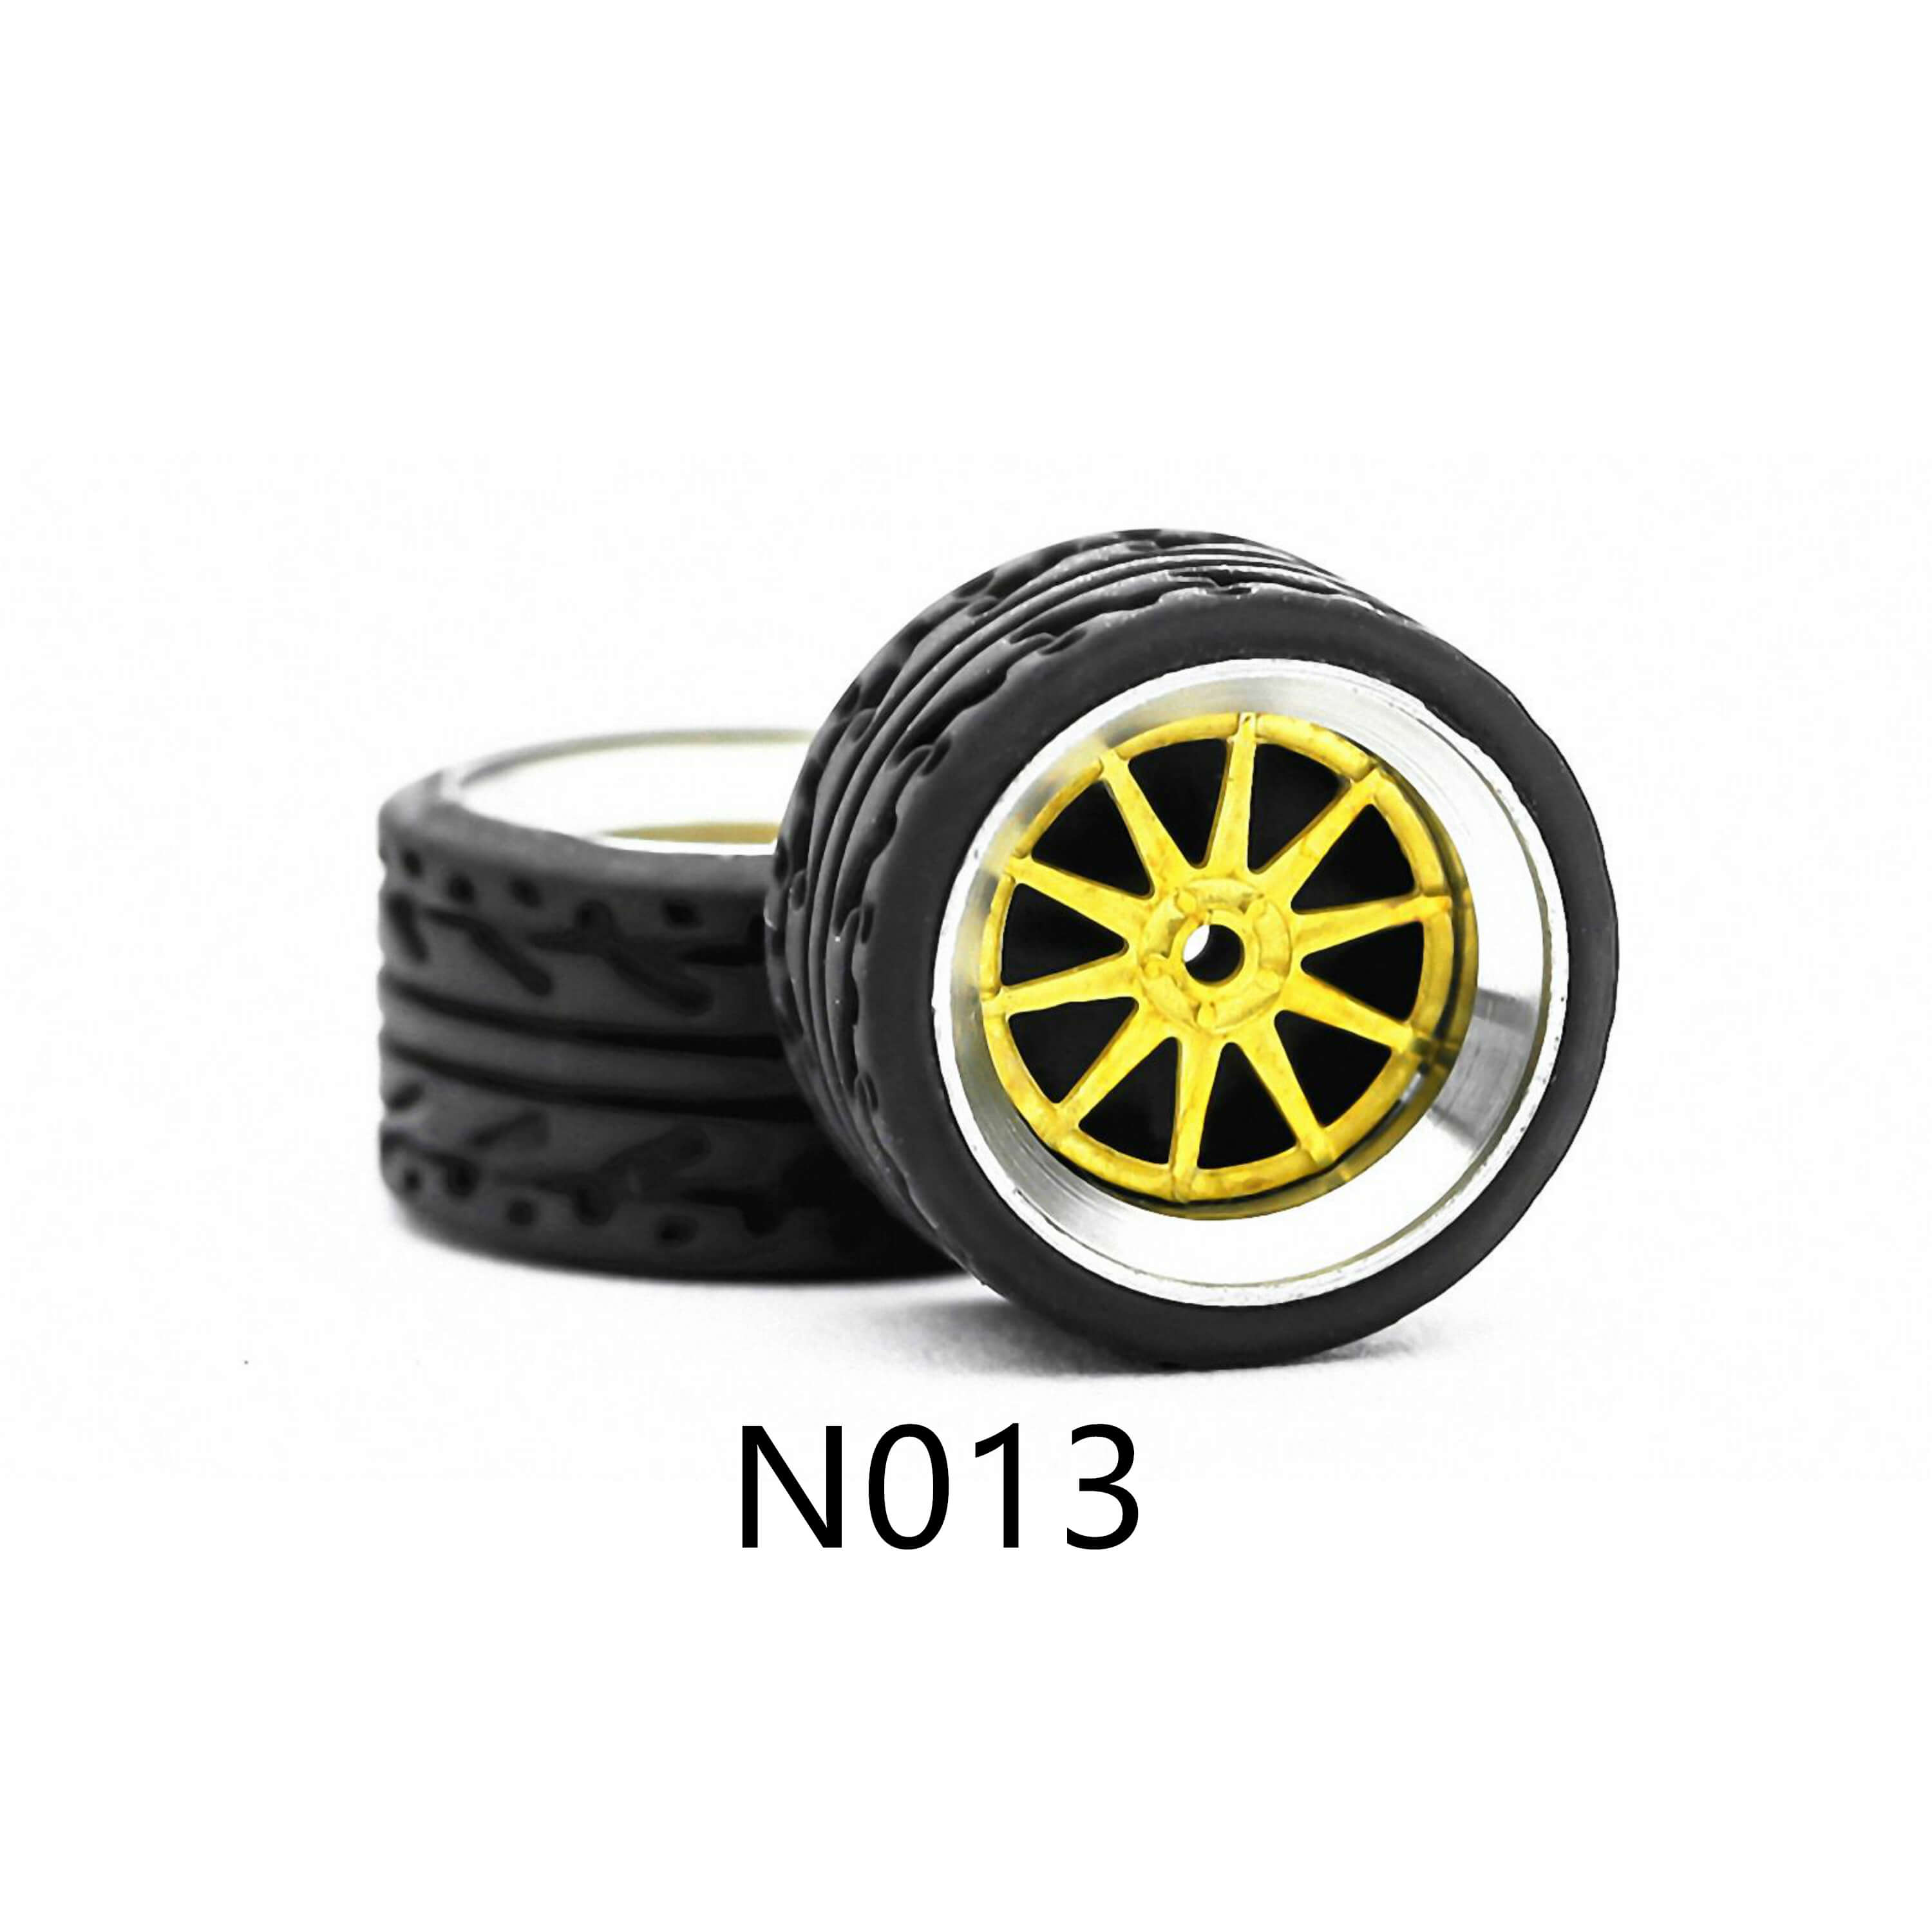 4 Pcs Set Wheels Rubber Tire 1/64 Scale Universal For Tomica Hotwheels Kyosho Greenlight - 164model